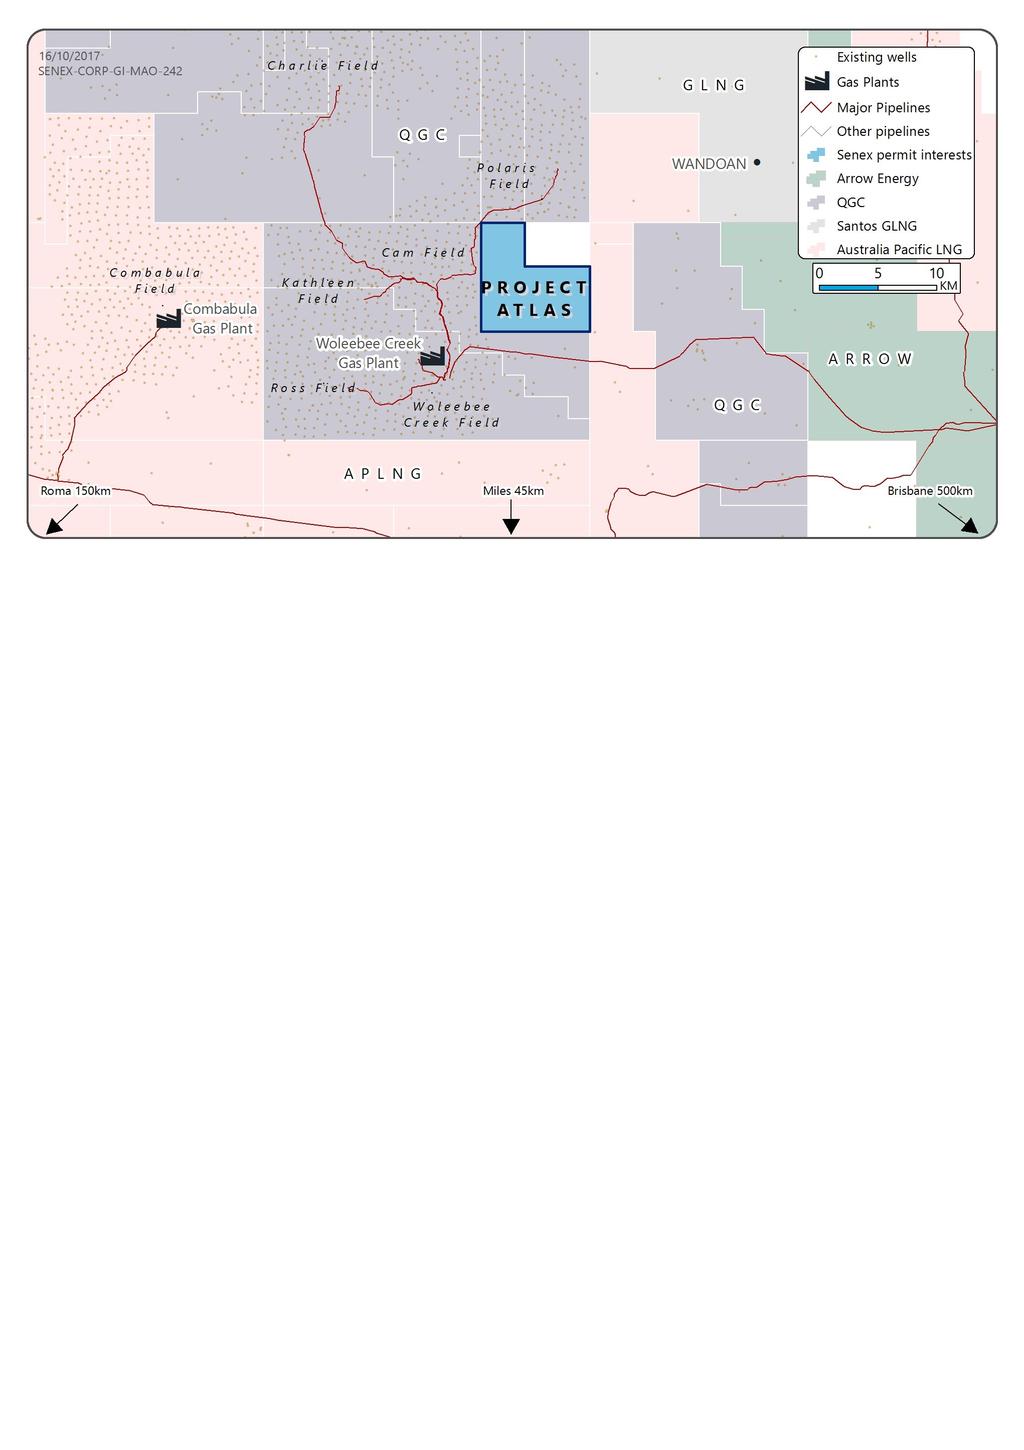 ly Report CORPORATE DEVELOPMENTS Senex awarded Surat Basin coal seam gas acreage by the Queensland Government for Australian domestic gas supply In 2017 Senex announced it had been awarded 58 square